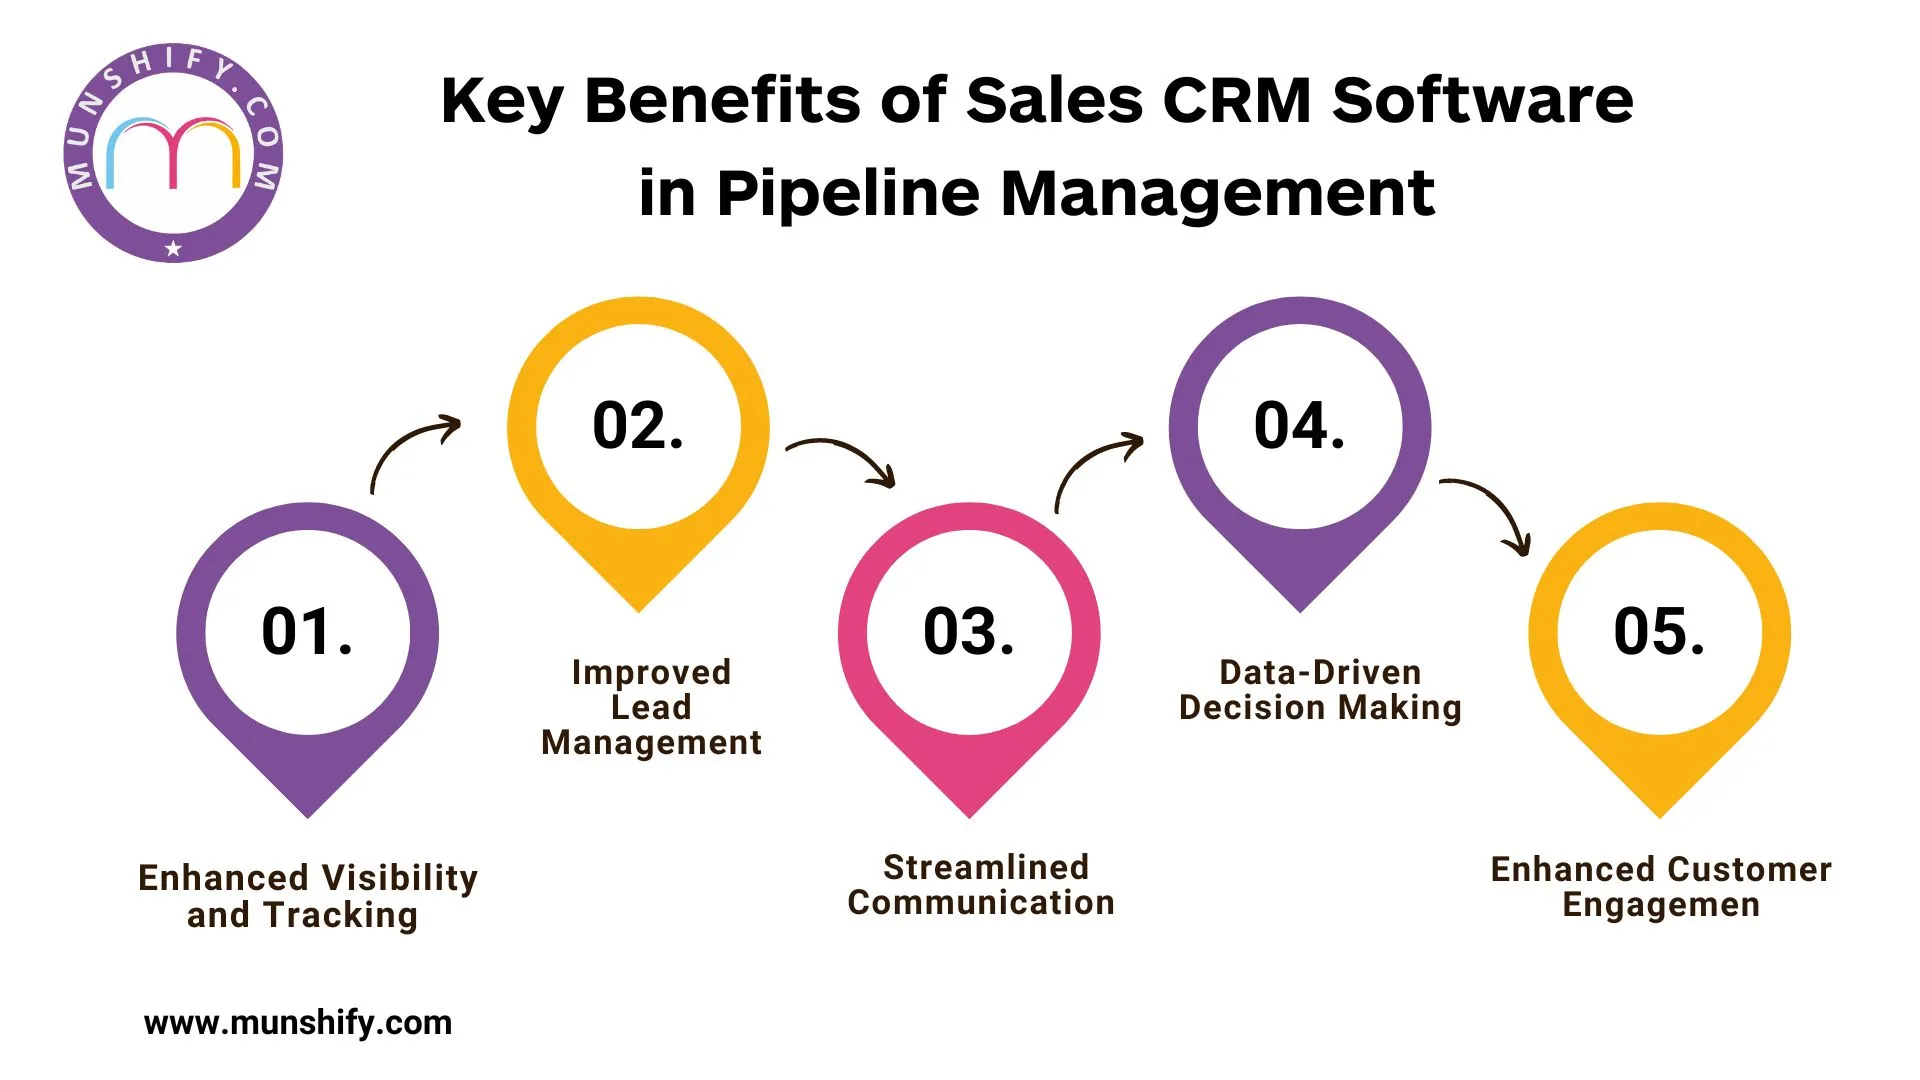 Key Benefits of Sales CRM Software in Pipeline Management